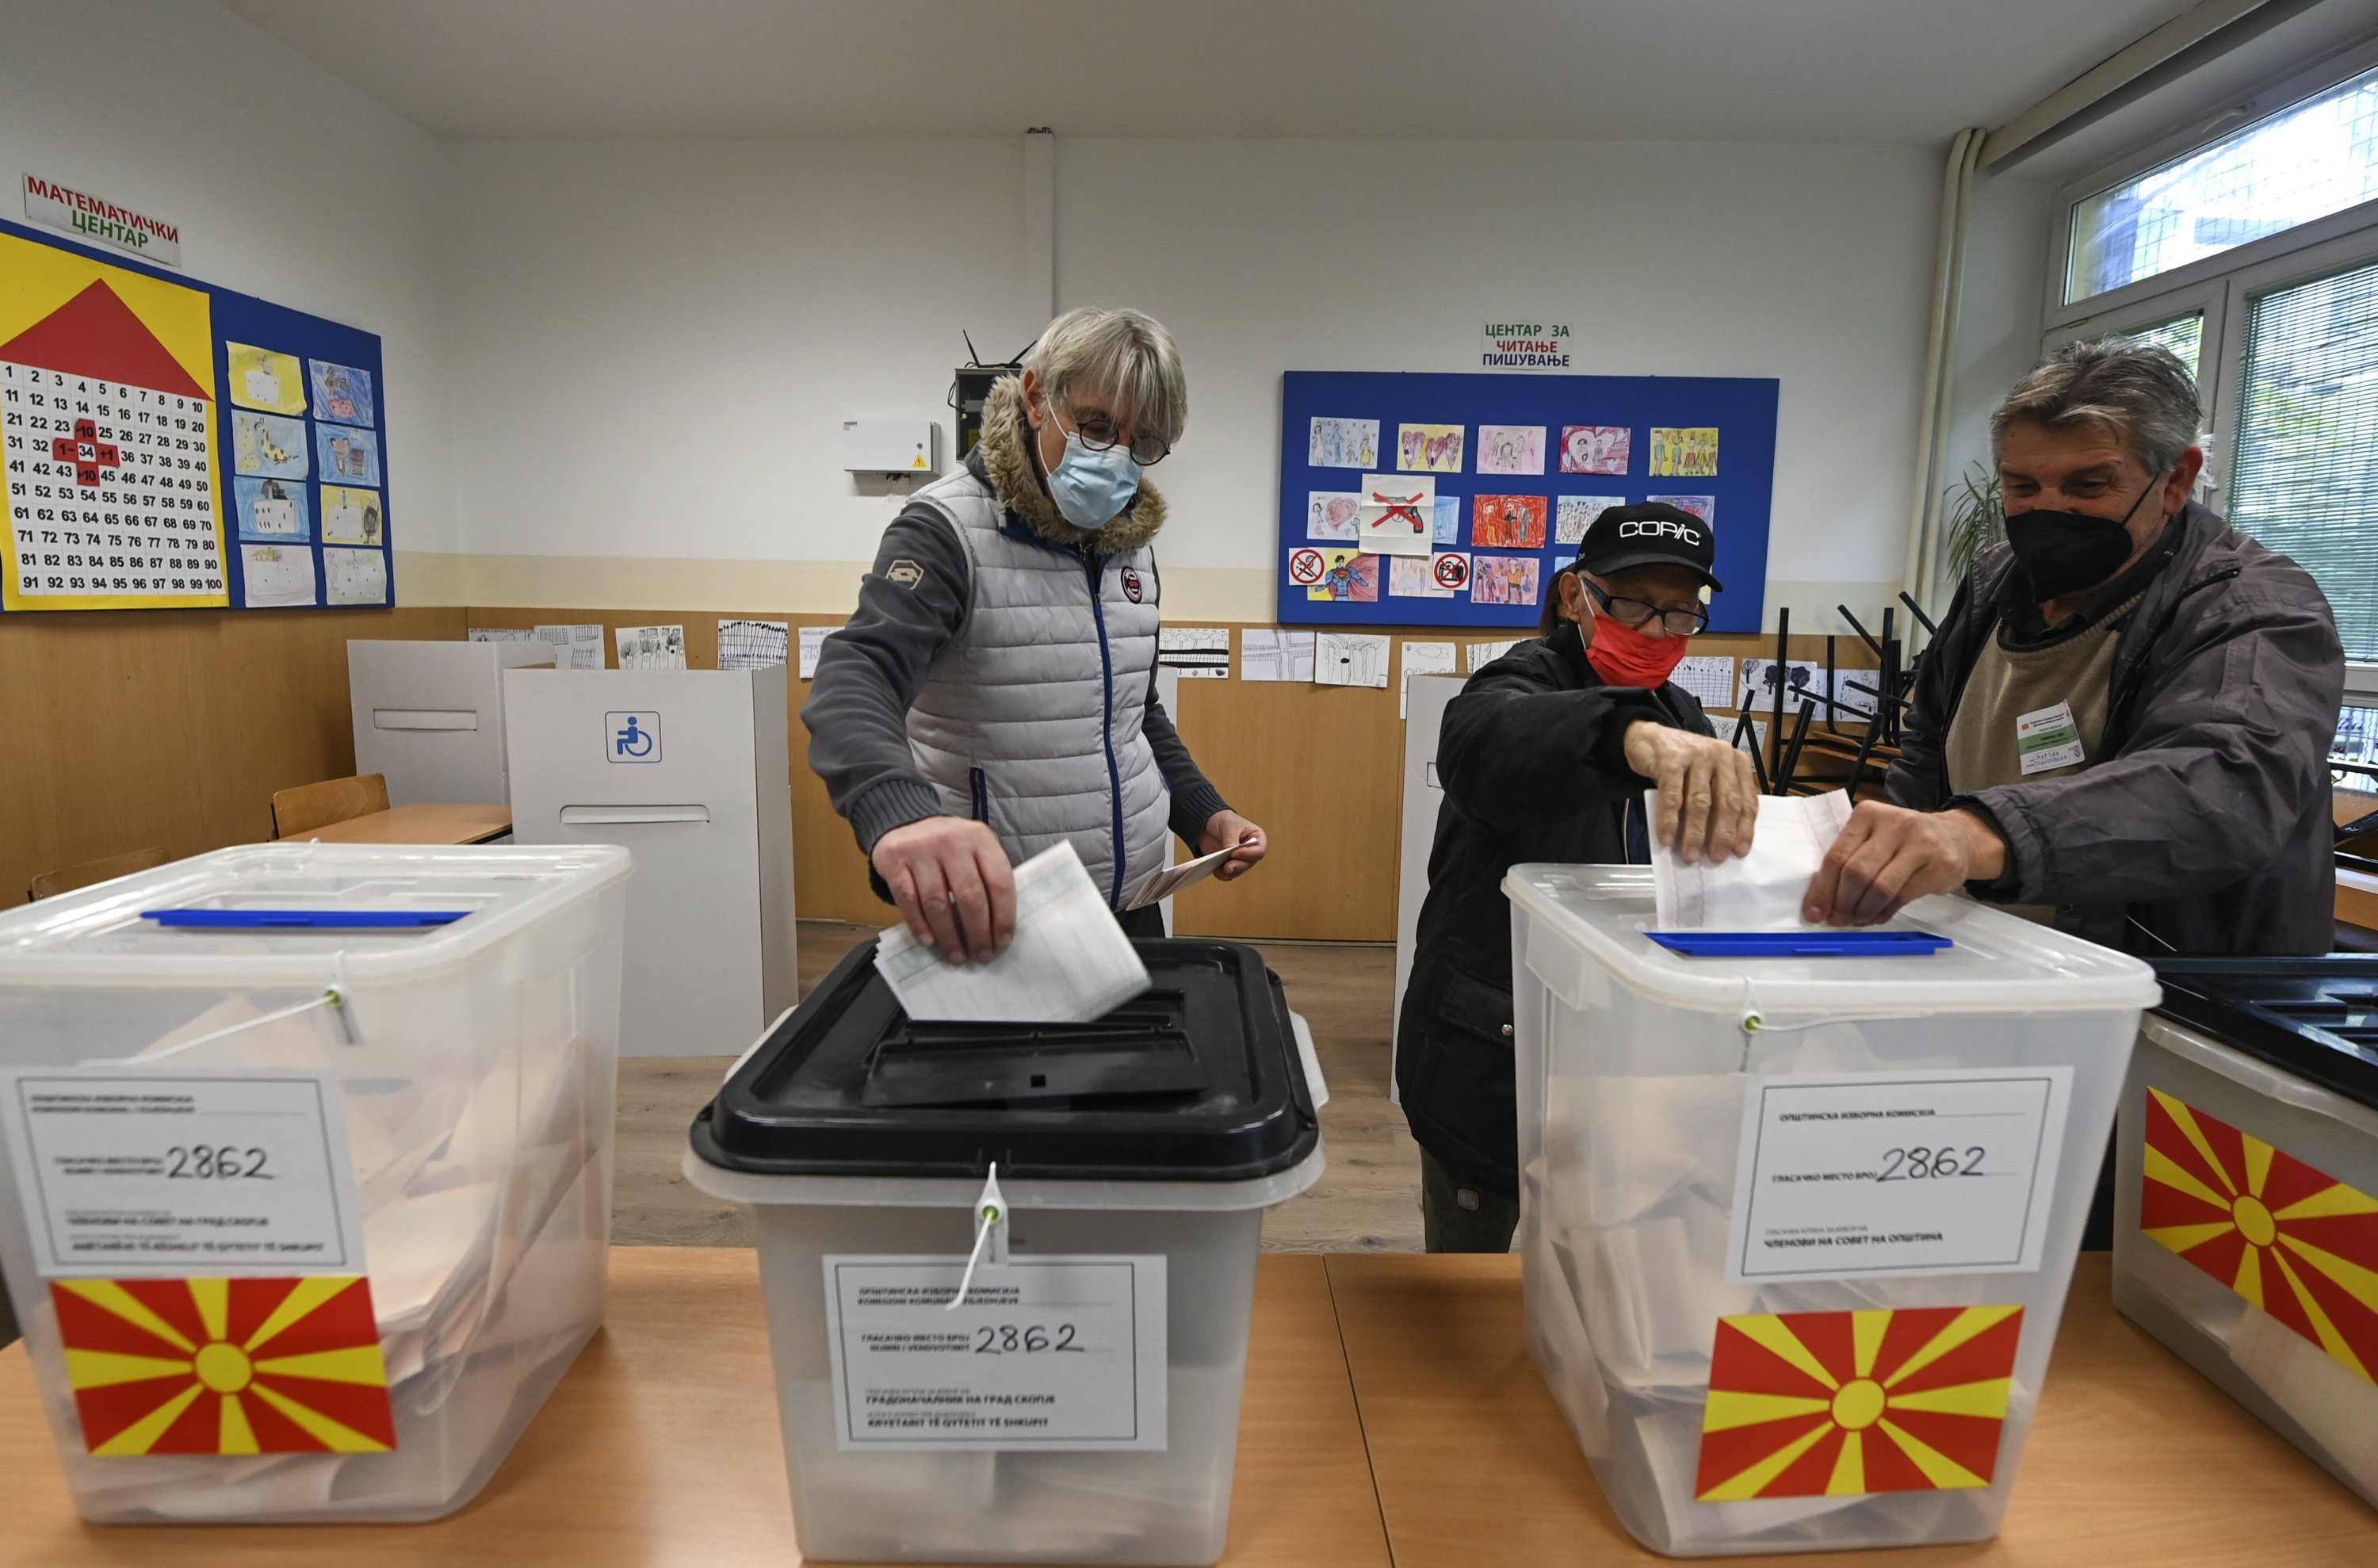 Kosovo, North Macedonia head to polls for local elections | Daily Sabah